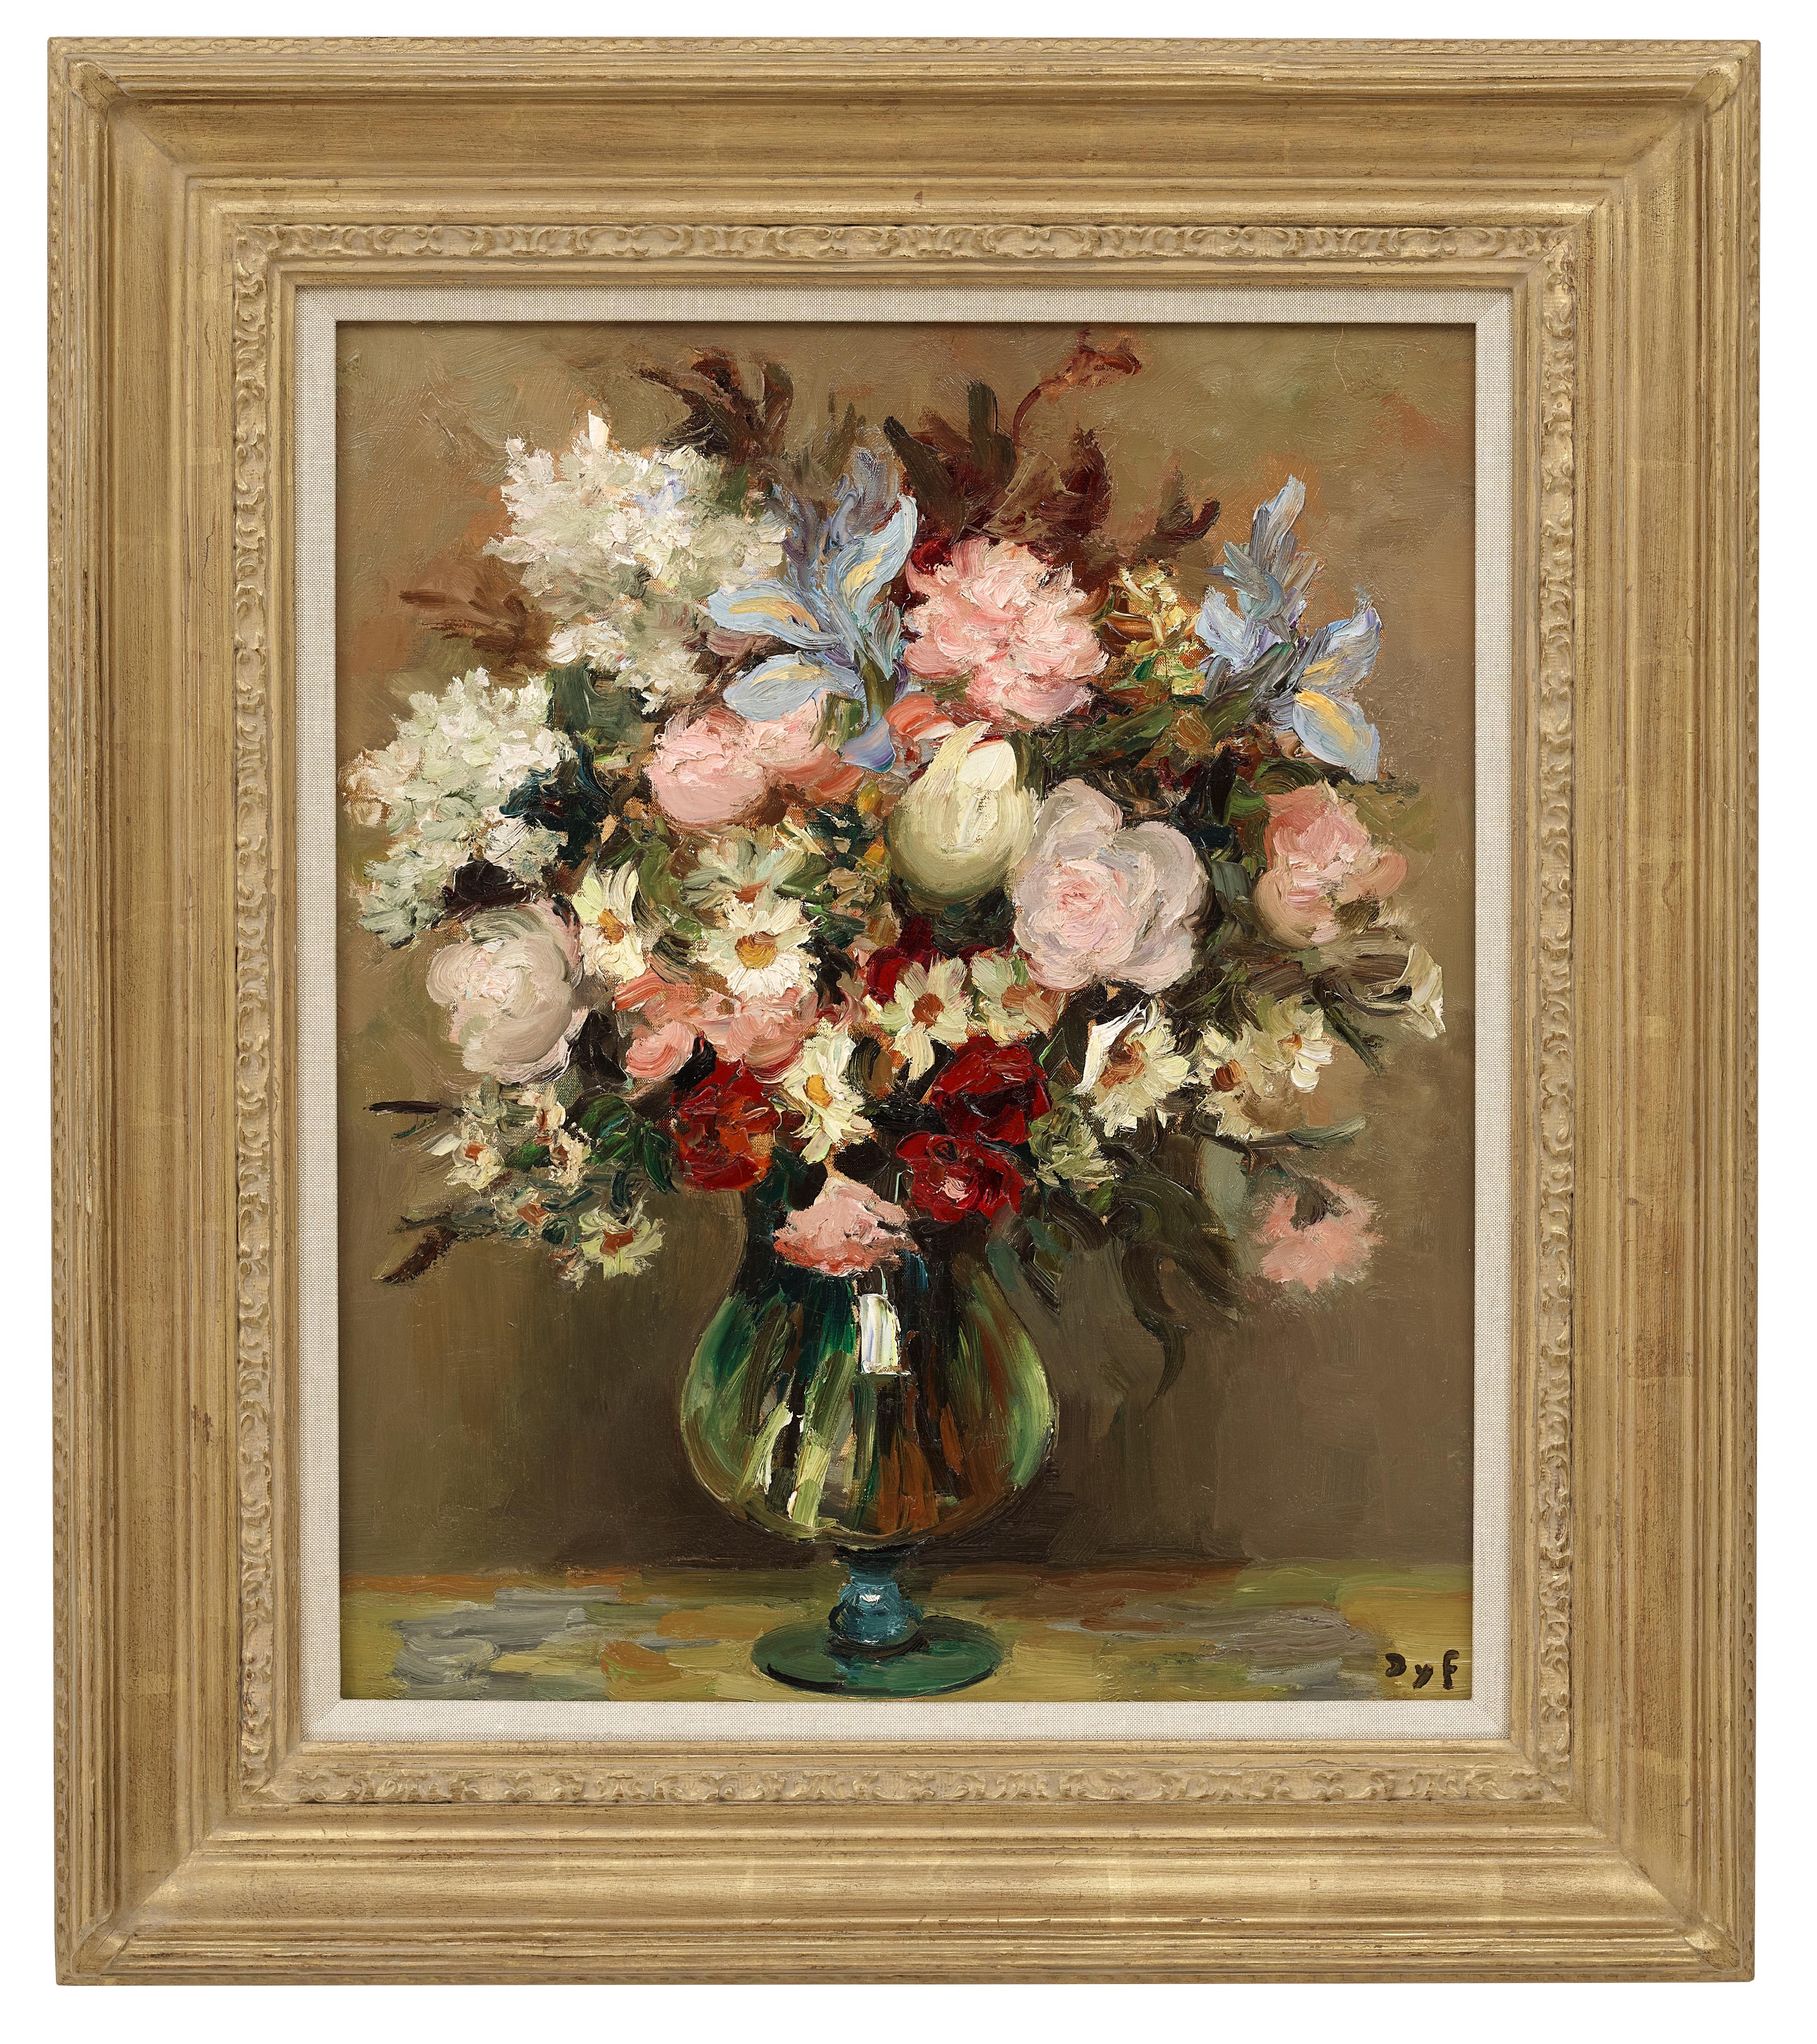 'Roses & Irises' 20th Century Still Life Painting of a pink bouquet of flowers